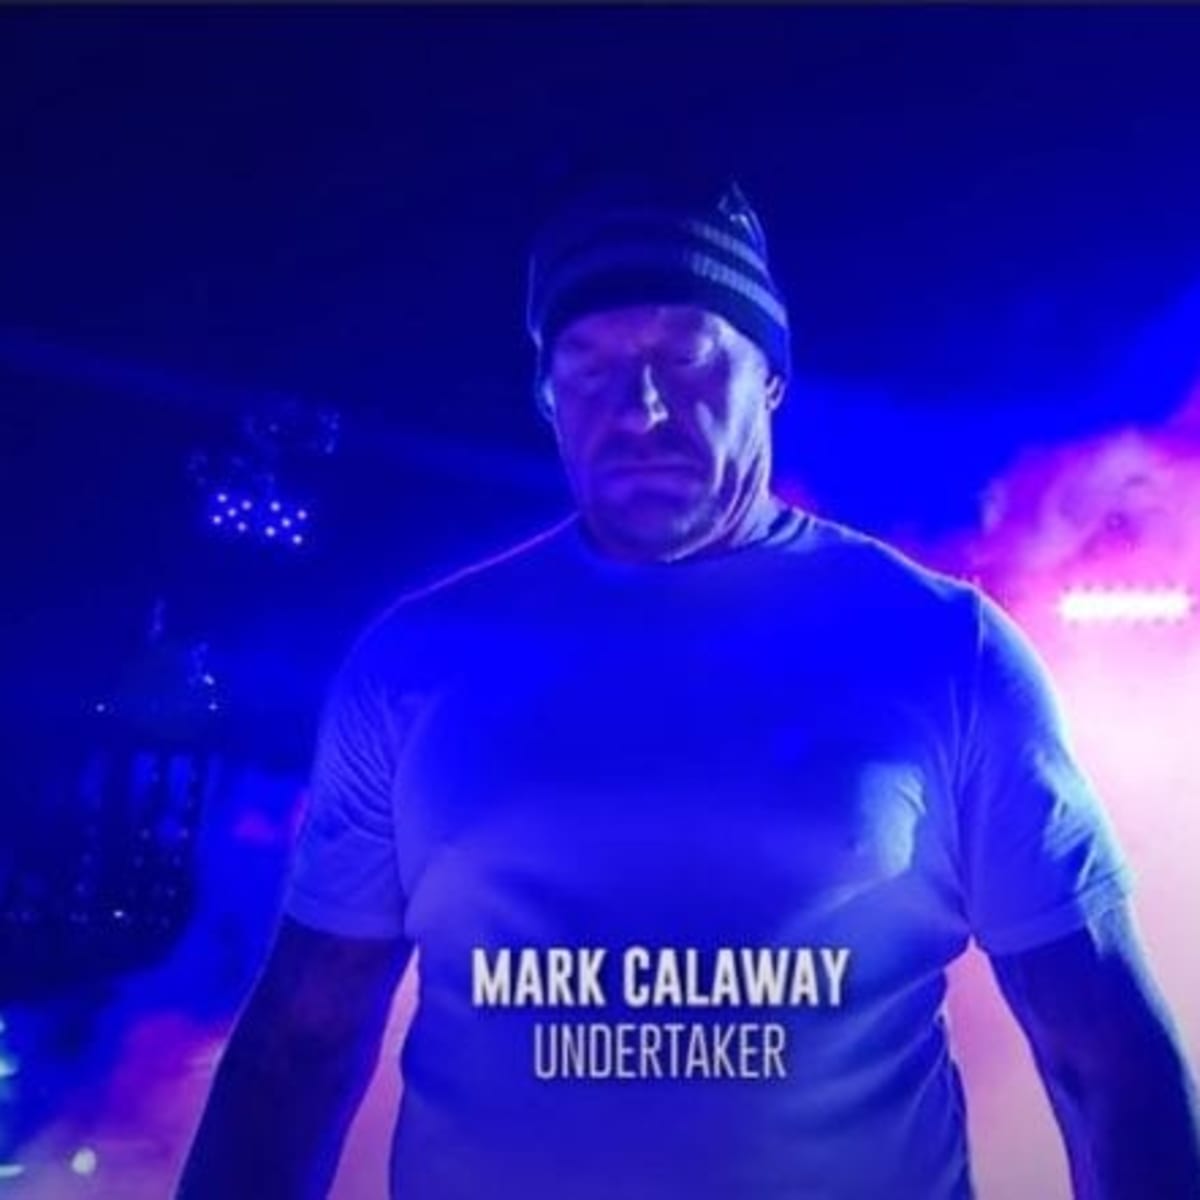 WATCH Clip from new documentary shows The Undertaker rehearsing his WrestleMania 33 entrance